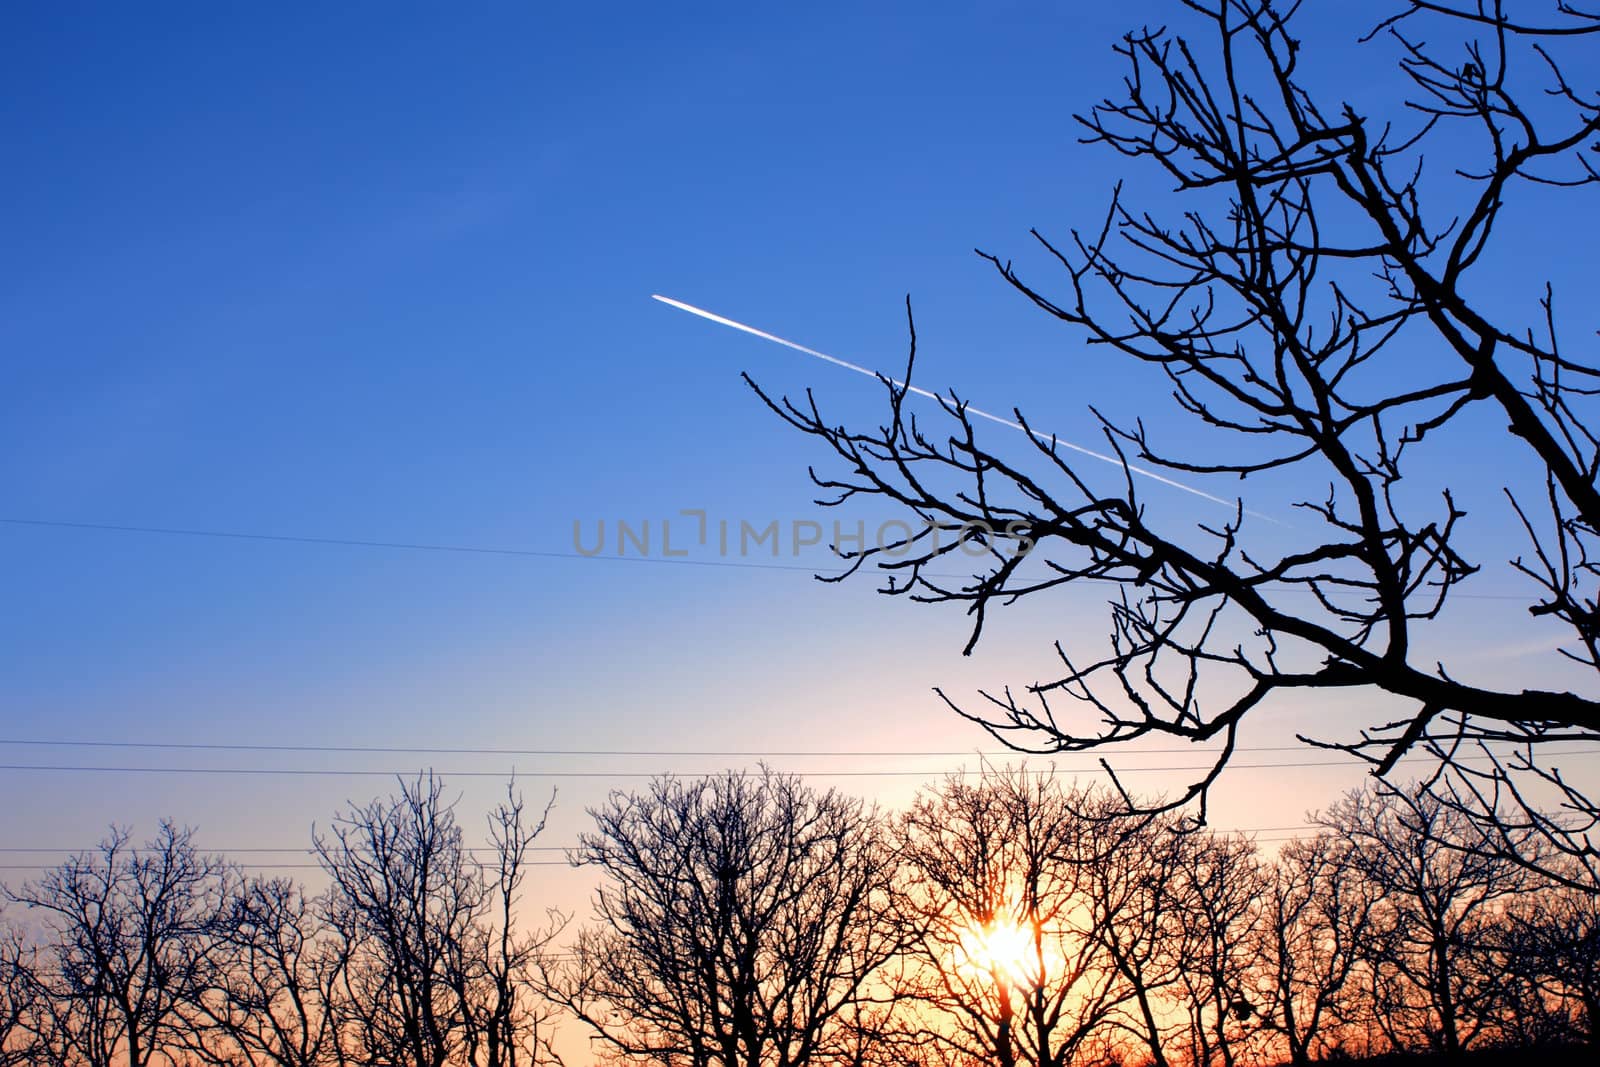 Track aircraft against a background of clear blue autumn sky and bare trees